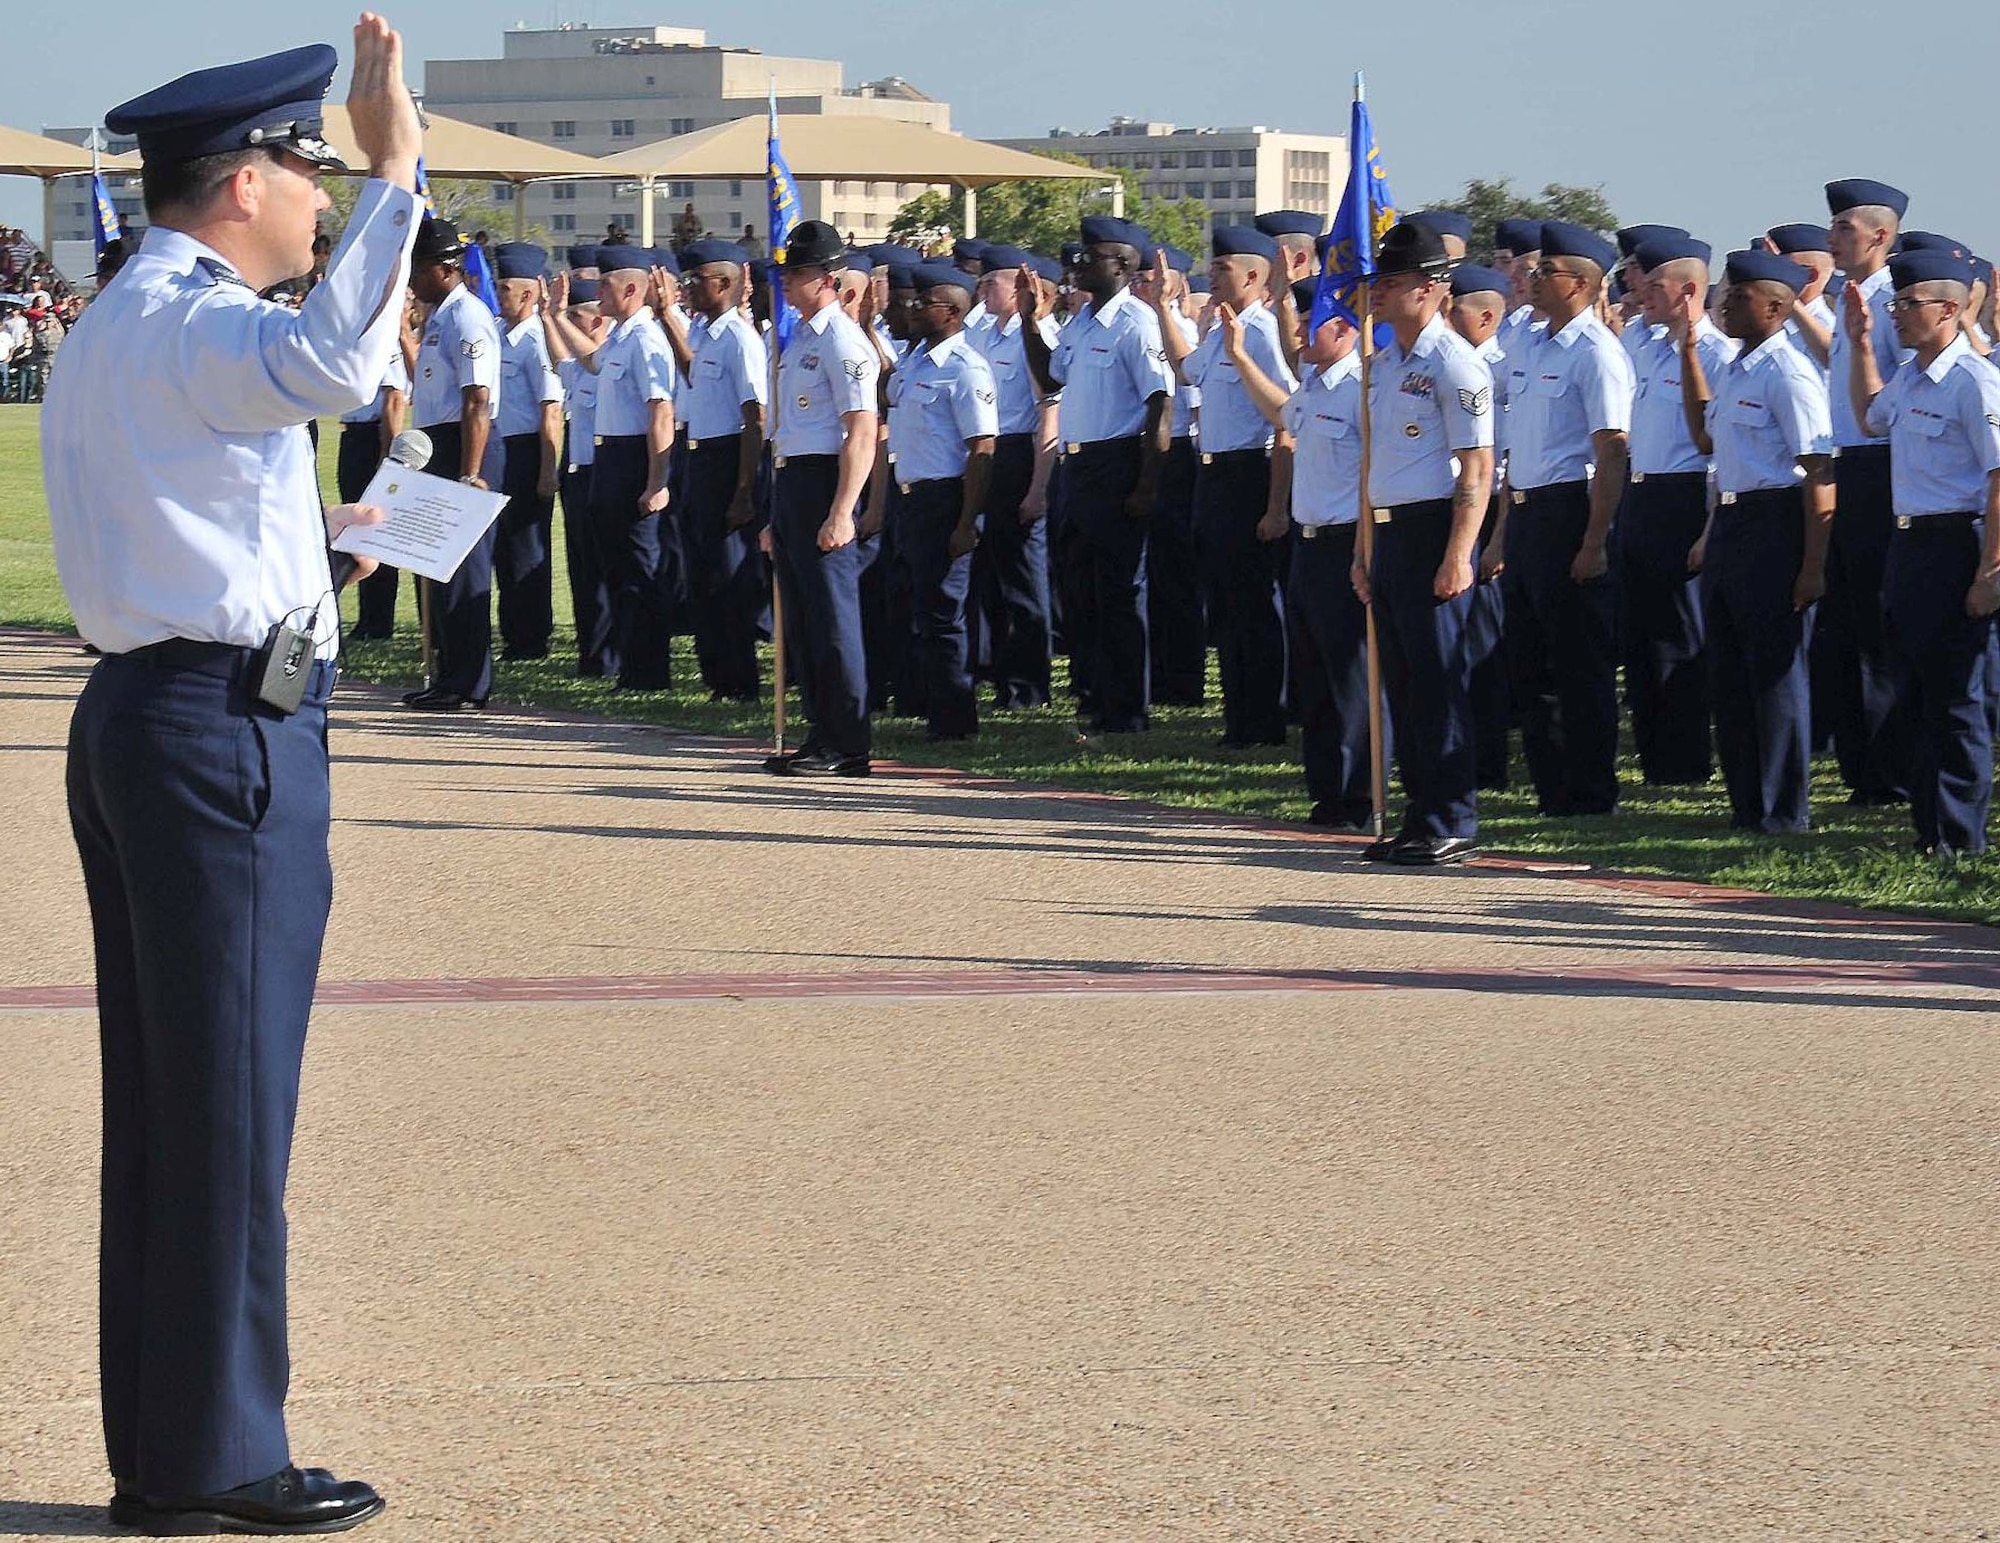 Col. Jerry Couvillion, Air Force Personnel Center, administers the oath of enlistment to the Sept. 7 Air Force basic training graduates, one of whom was his son Airman Basic Patrick Couvillion. (U.S. Air Force photo by Alan Boedeker)